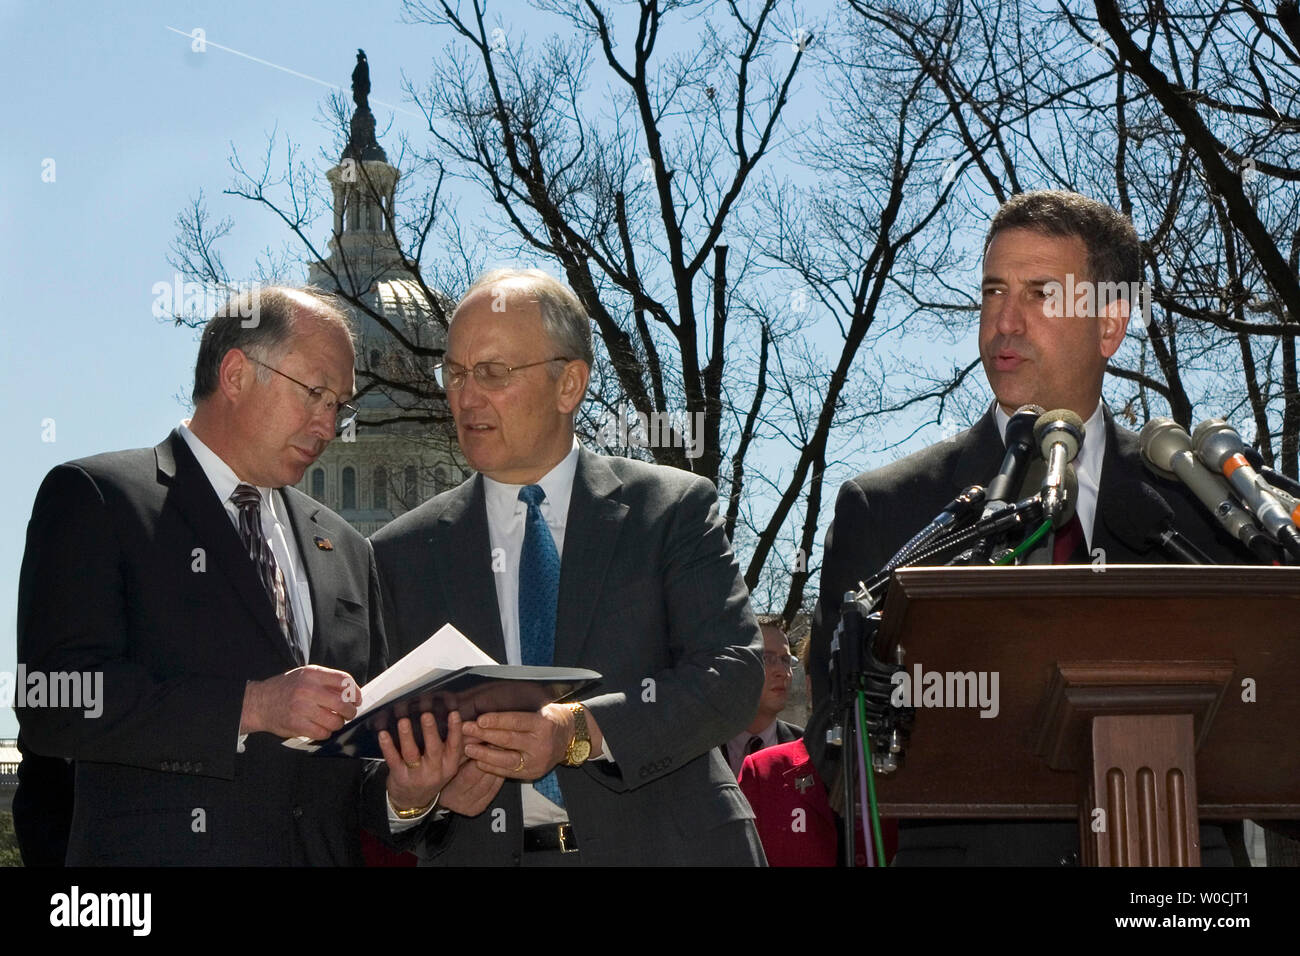 US Senators Ken Salazar, D-CO, back left, and Larry Craig, R – ID, confer as US Senator , Russ Feingold, D-WI, right, speaks speaks to the press on Capitol Hill about the adoption of a bipartisan bill to revise several particularly controversial provisions of the Patriot Act, Tuesday, April 5, 2005, in Washington. (UPI Photo/Kamenko Pajic) Stock Photo